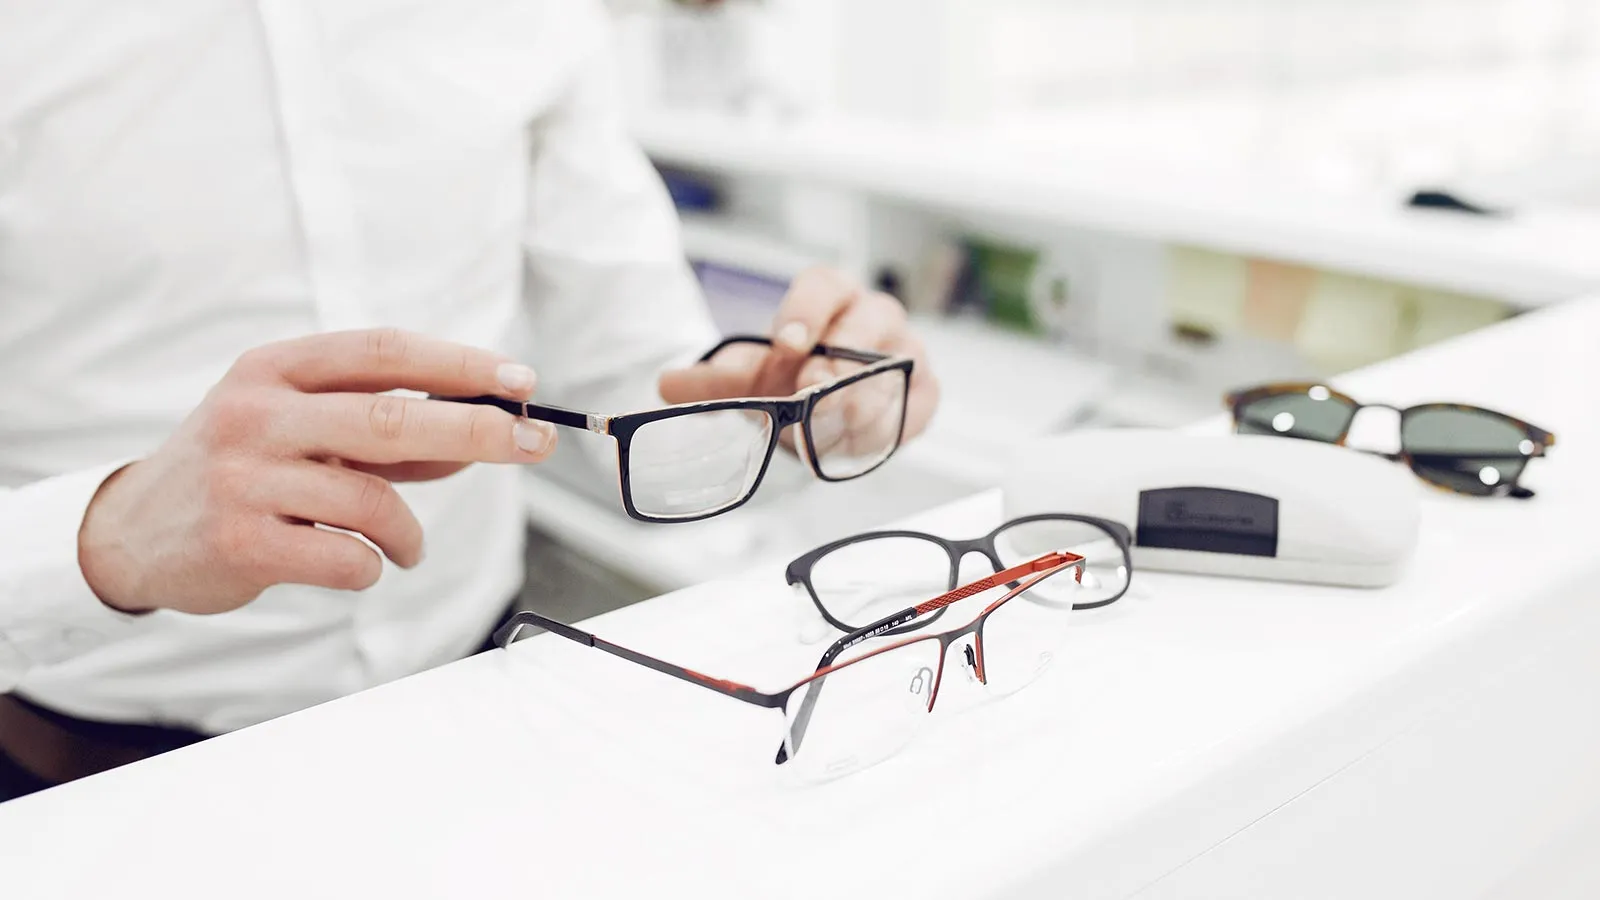 Optician - When to consult and educational background